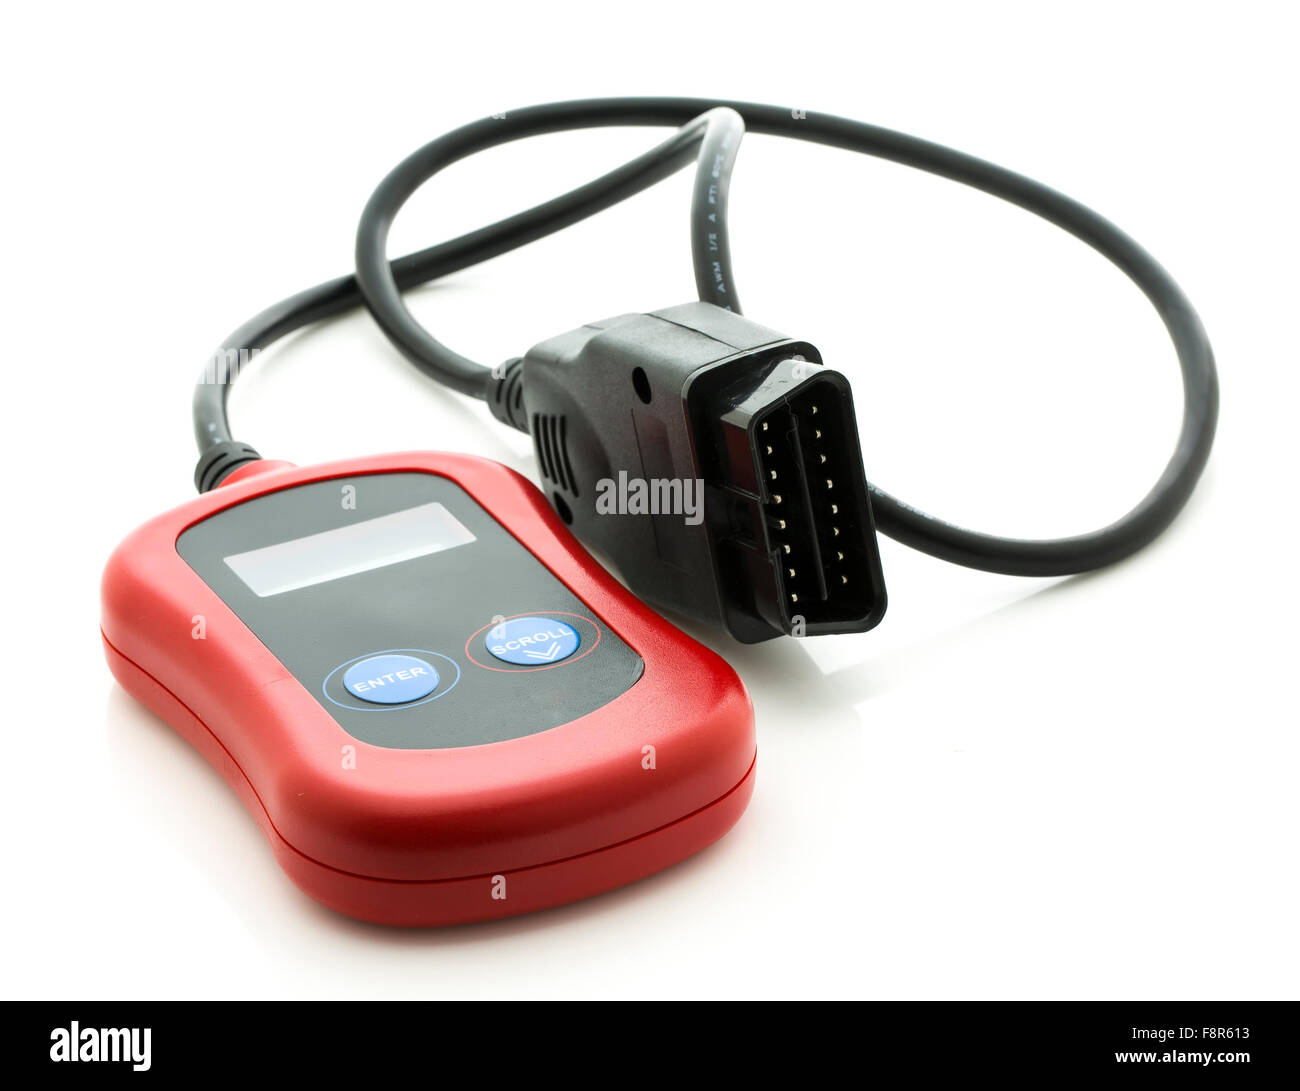 OBDII Fault Scanner on a white background Stock Photo